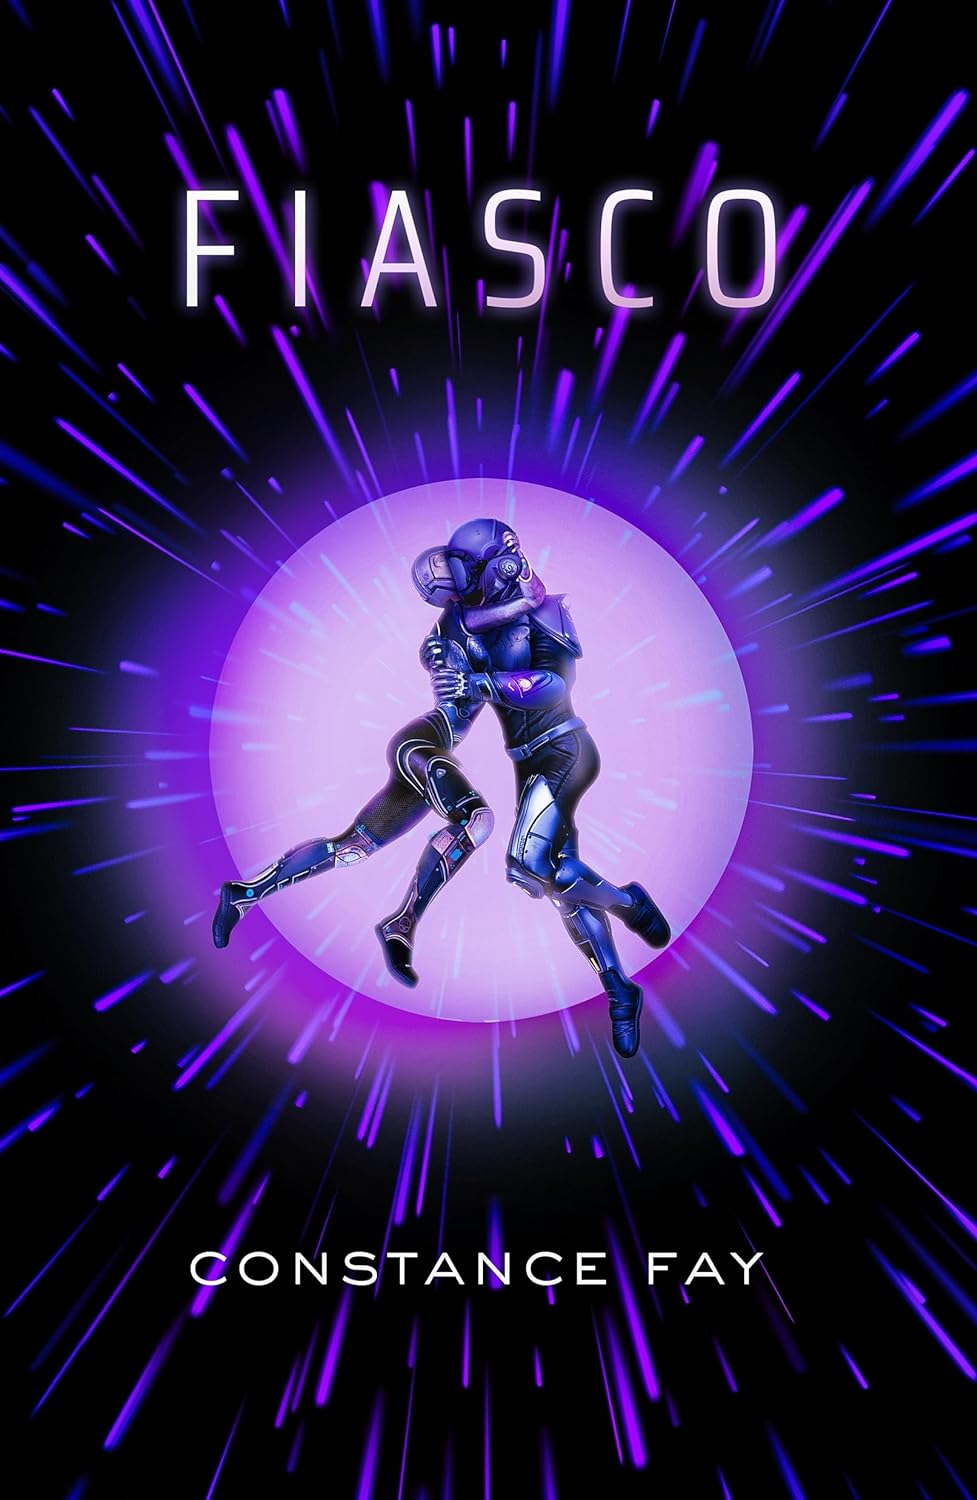 Book Review: Fiasco by Constance Fay (sci-fi)